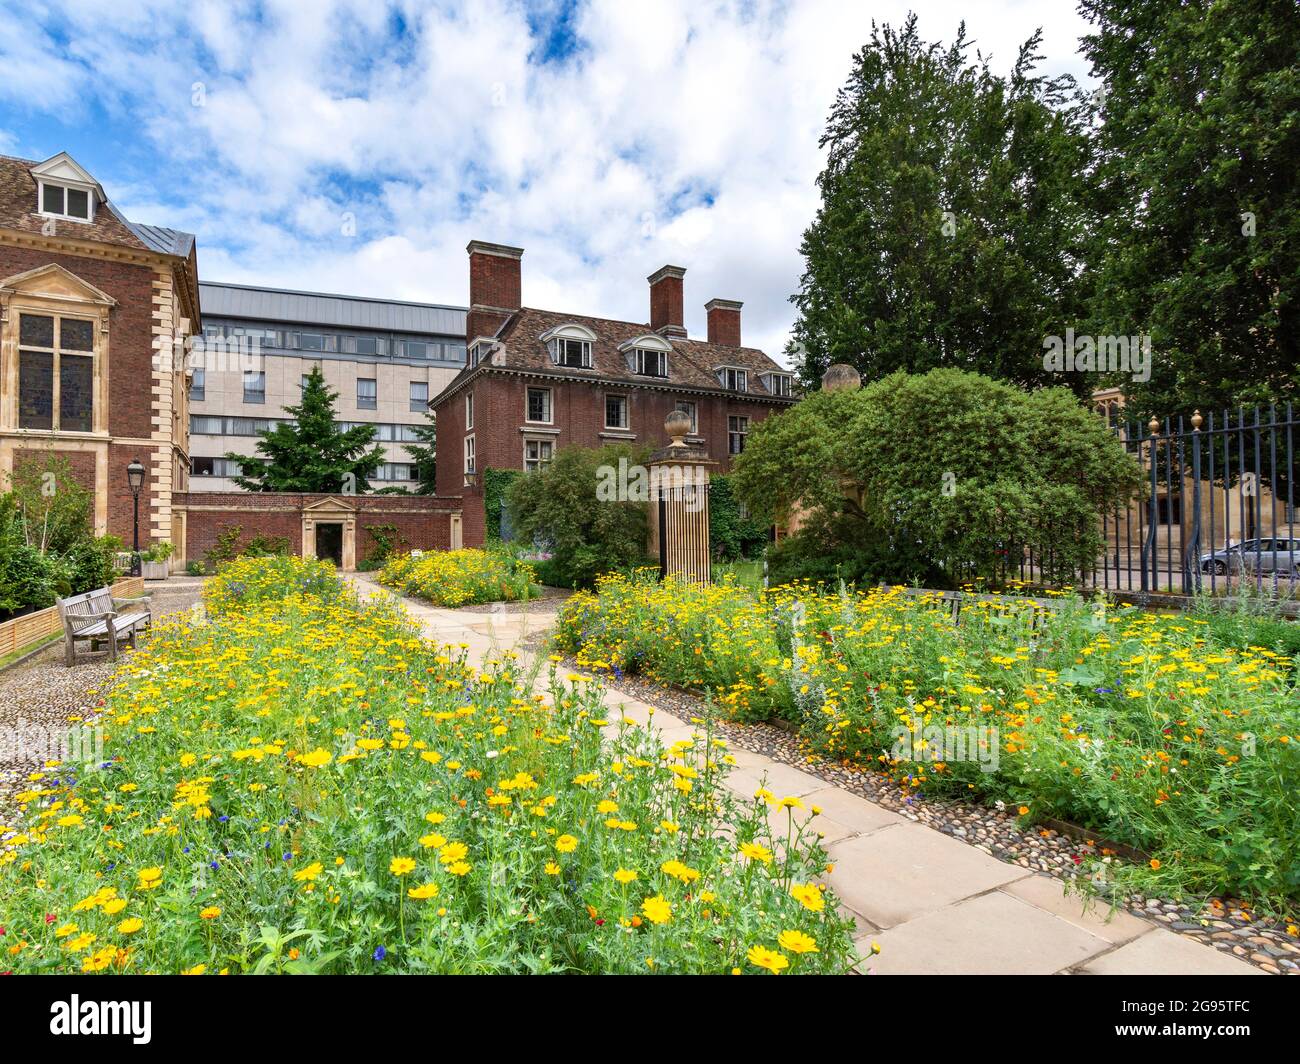 CAMBRIDGE ENGLAND TRUMPINGTON STREET ST CATHARINE'S COLLEGE COLOURFUL FLOWER BEDS IN SUMMER Stock Photo